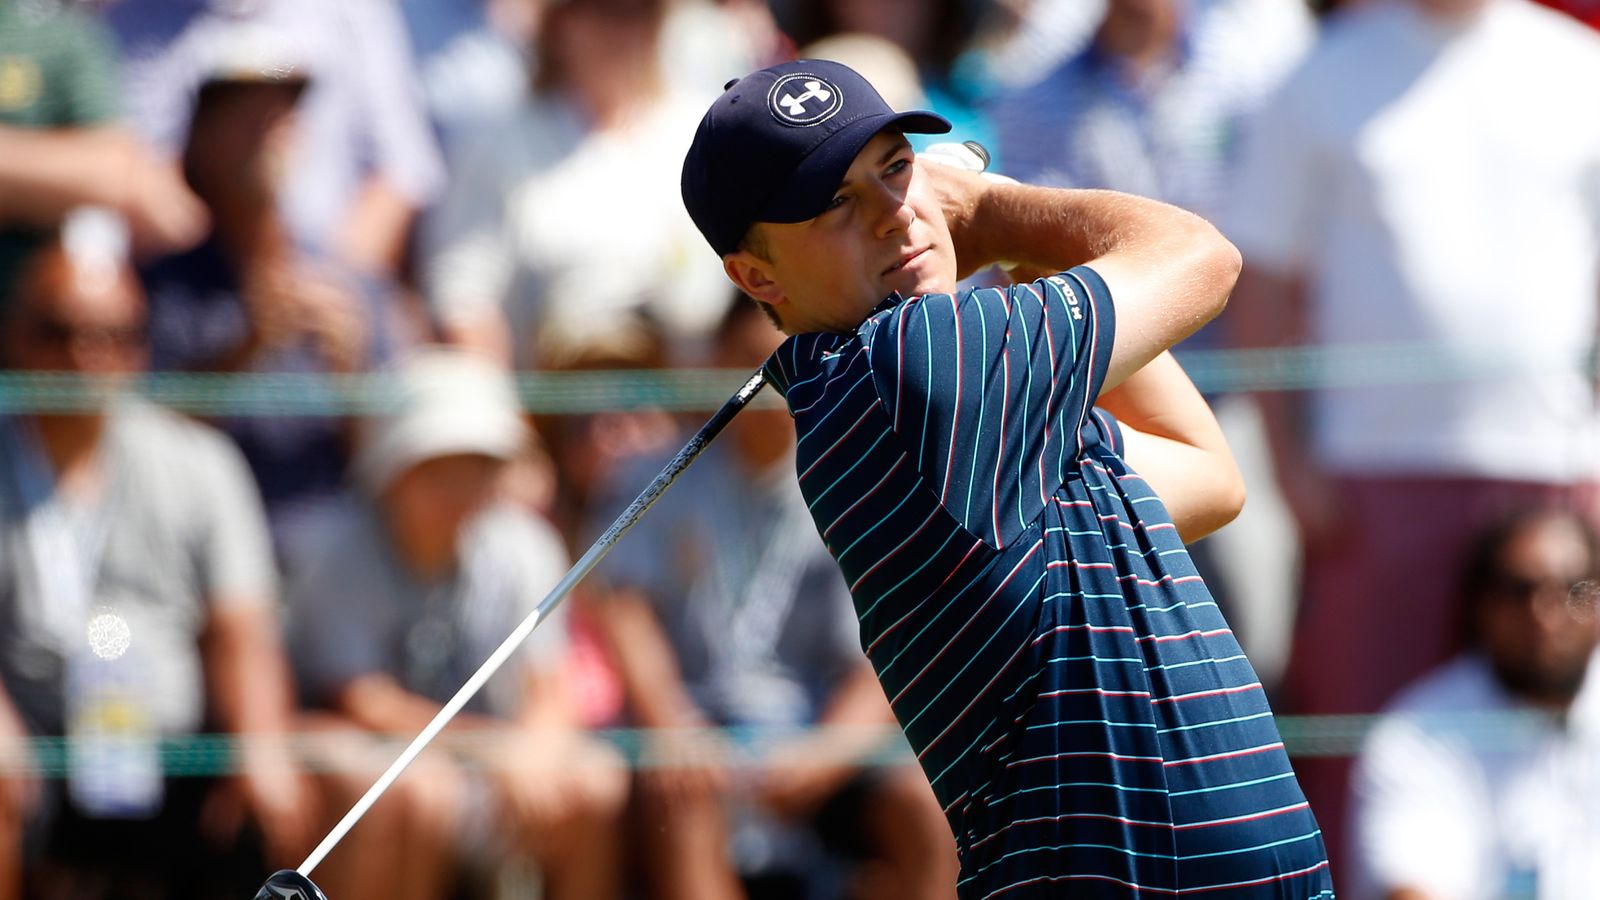 A selection of the best facts and figures for Jordan Spieth's career so